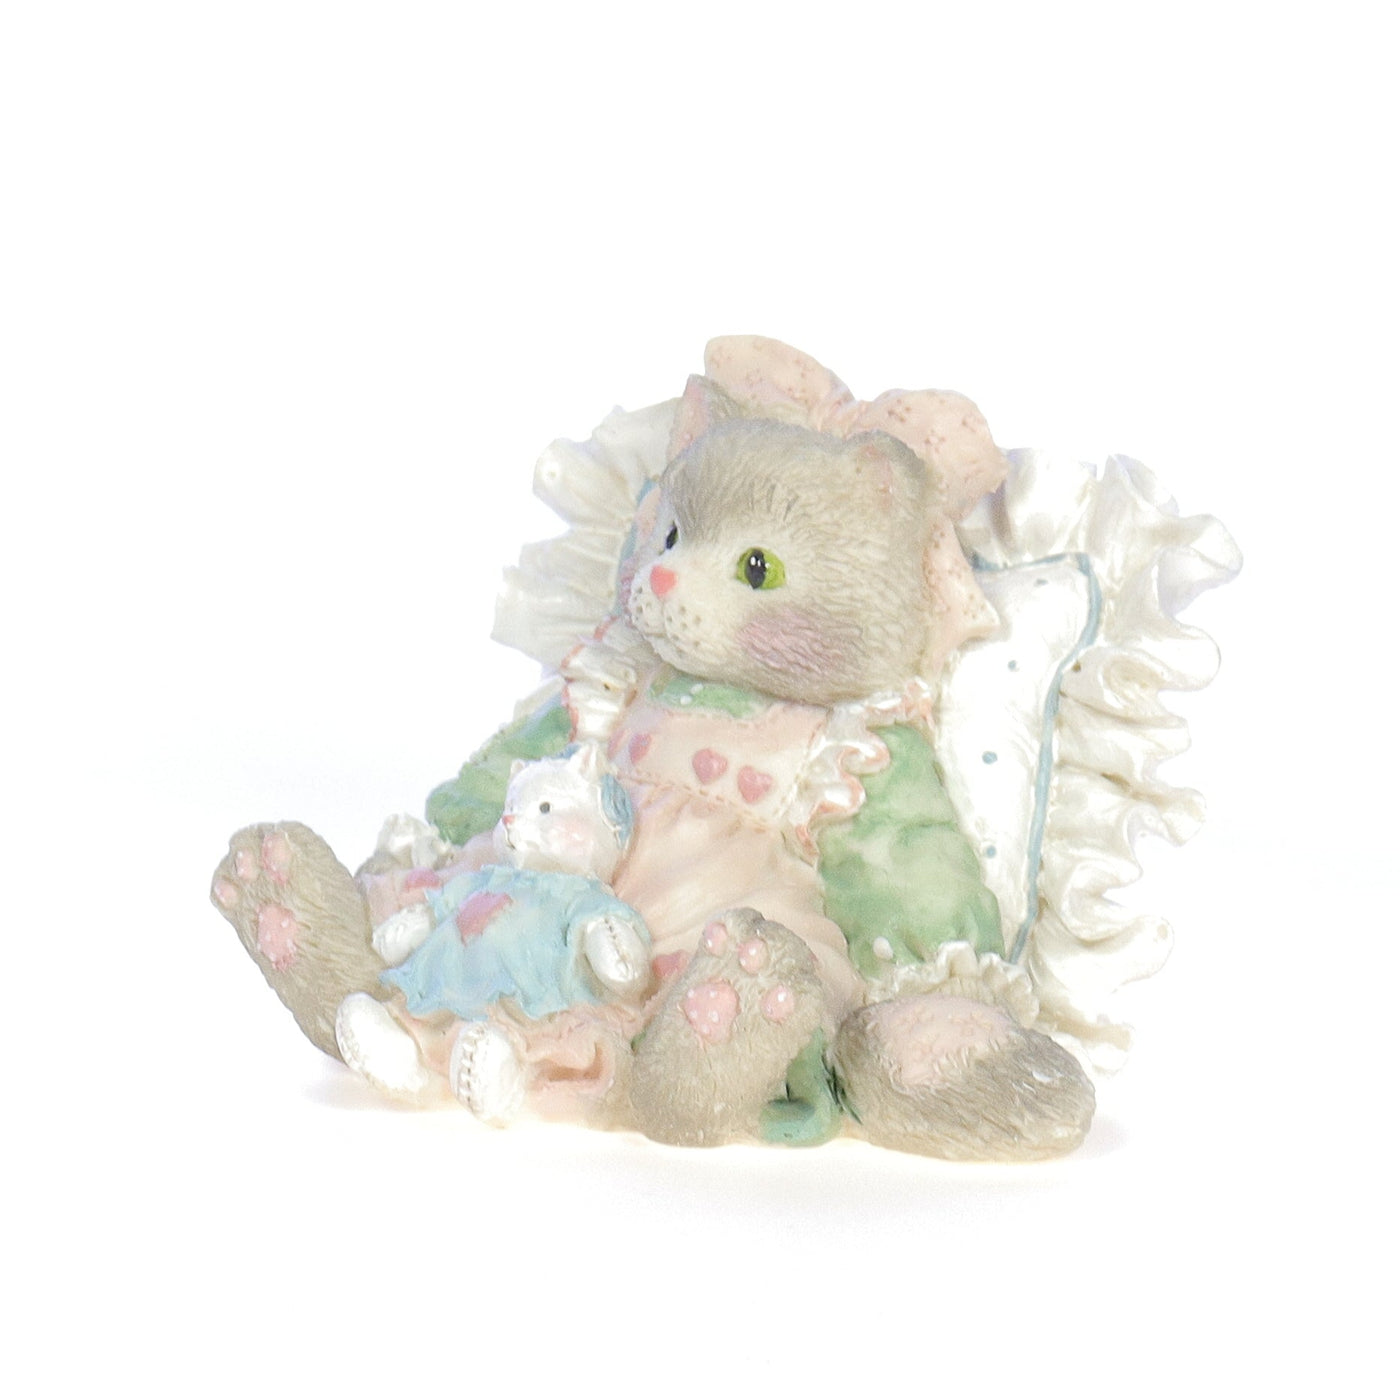 Calico_Kittens_Friends_Are_Cuddles_Of_Love_Friendship_Figurine_1992